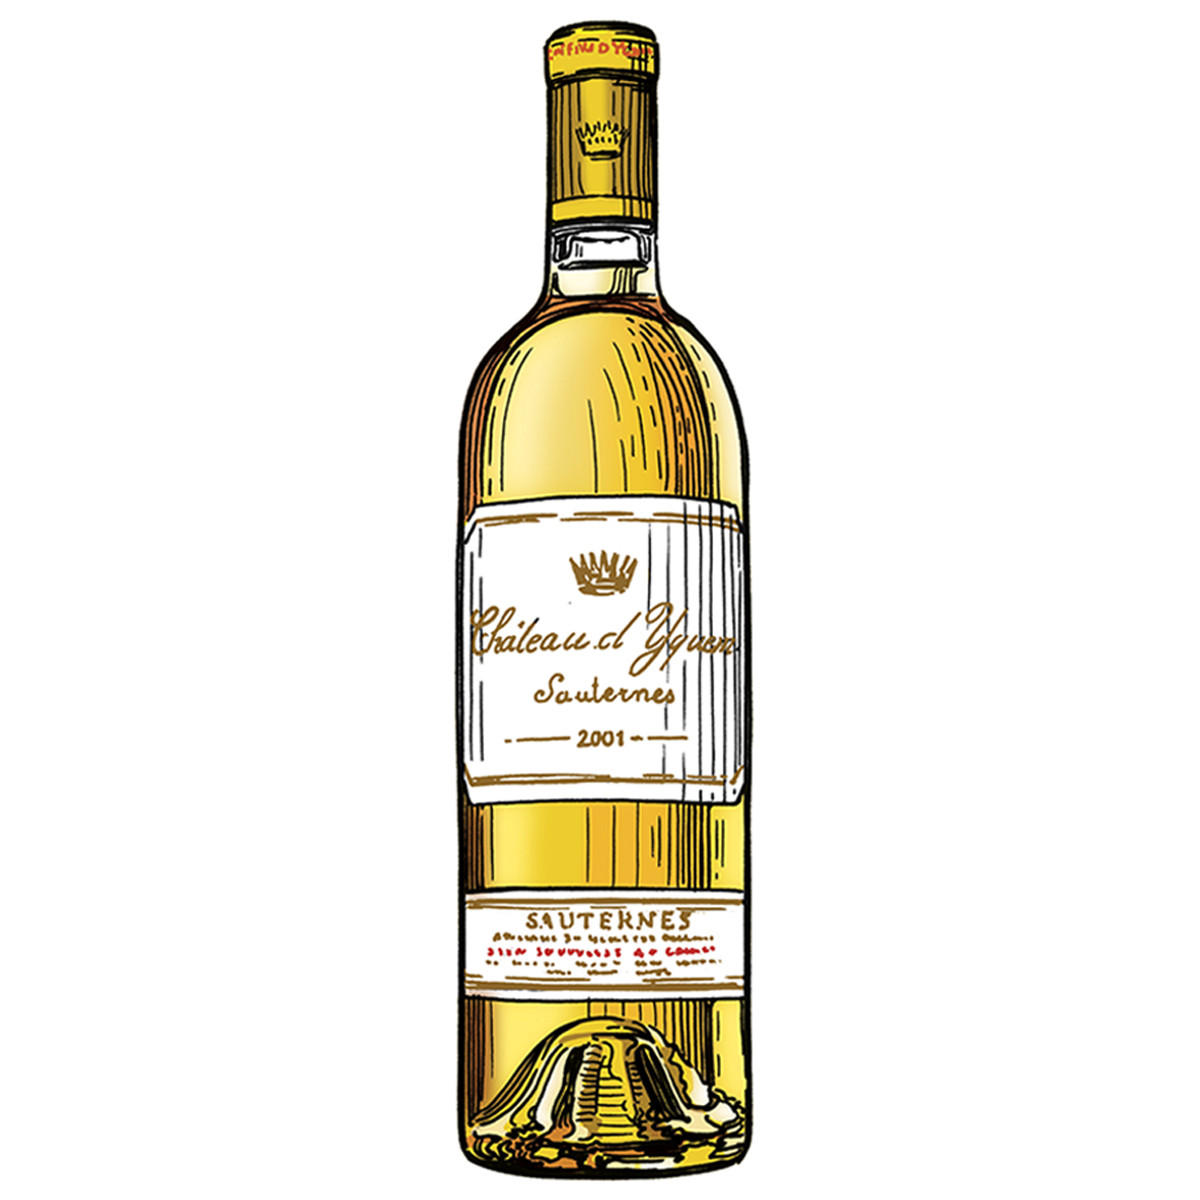 When it comes to collecting Sauternes, the 2001 Château d’Yquem is top of most collectors' wish-lists.